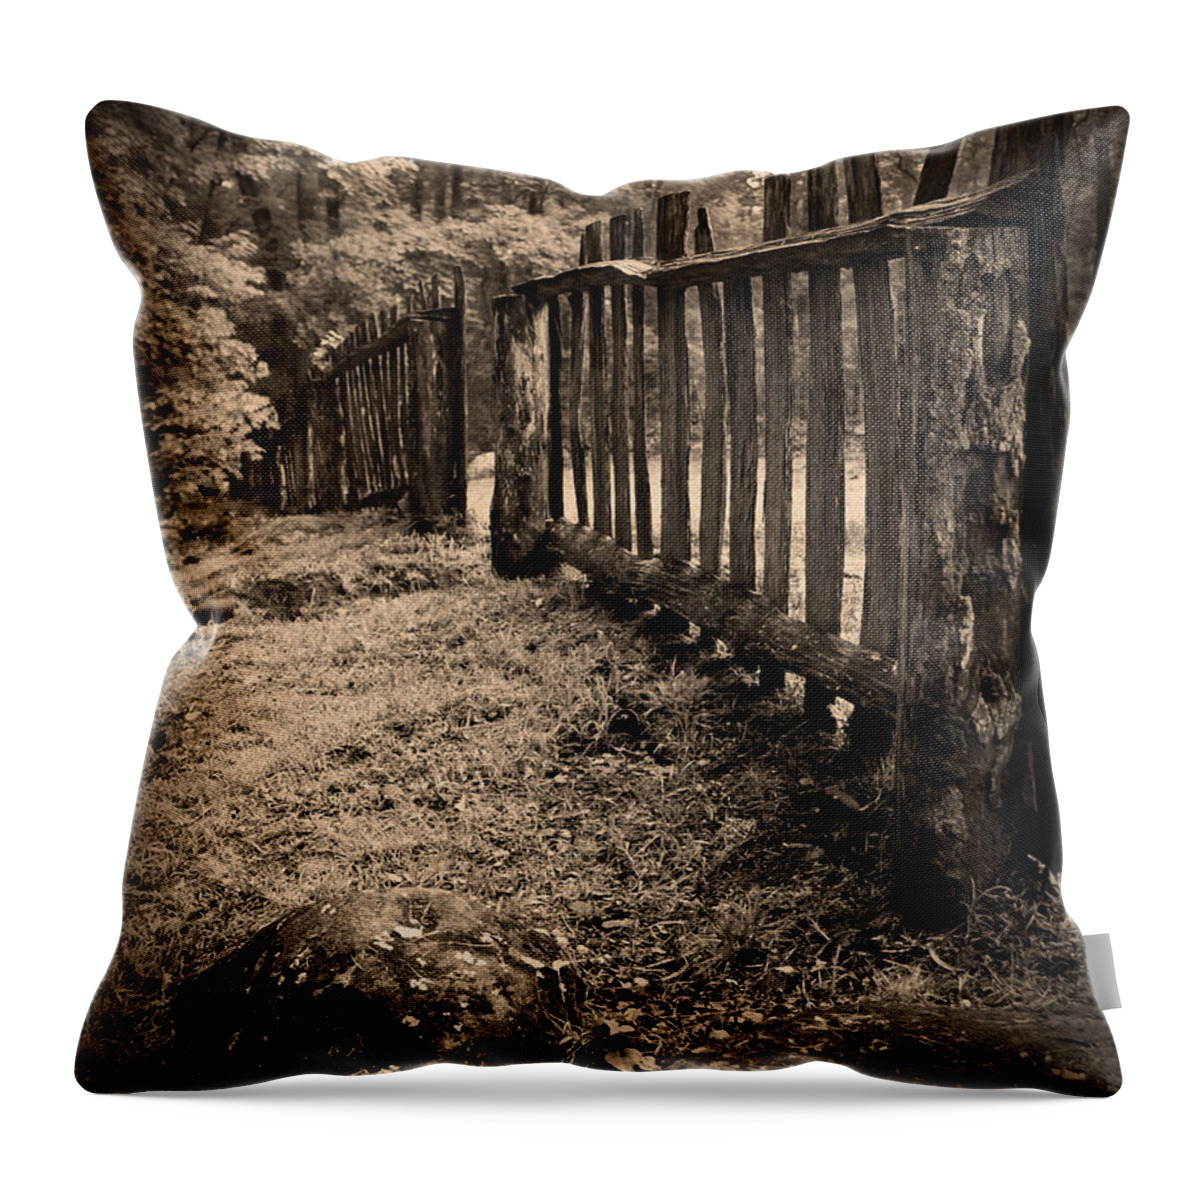 Rustic Throw Pillow featuring the photograph Old Fence by Larry Bohlin